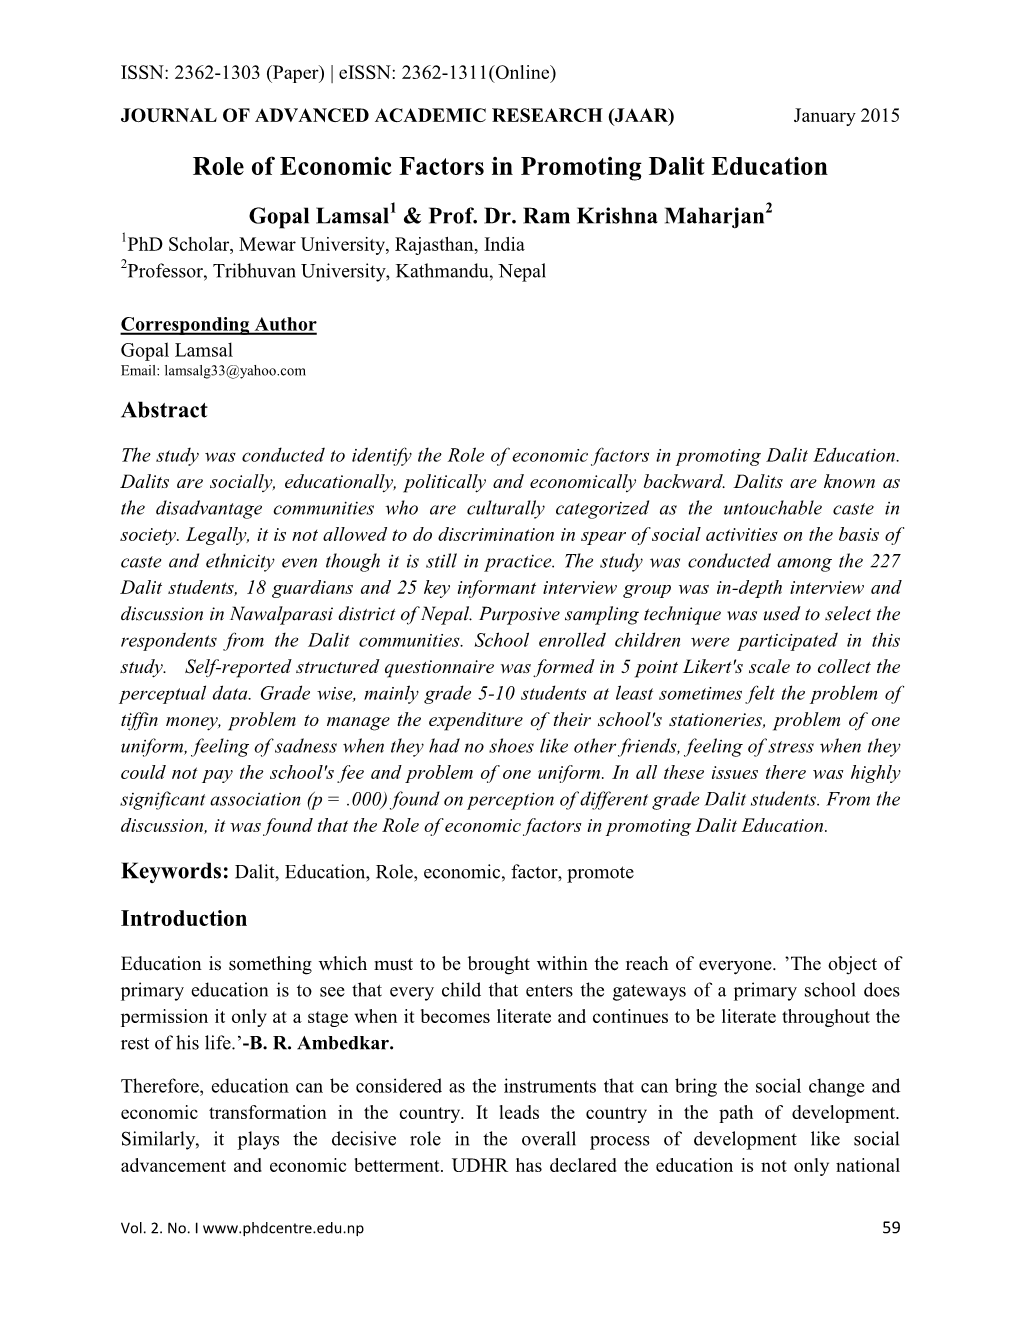 Role of Economic Factors in Promoting Dalit Education